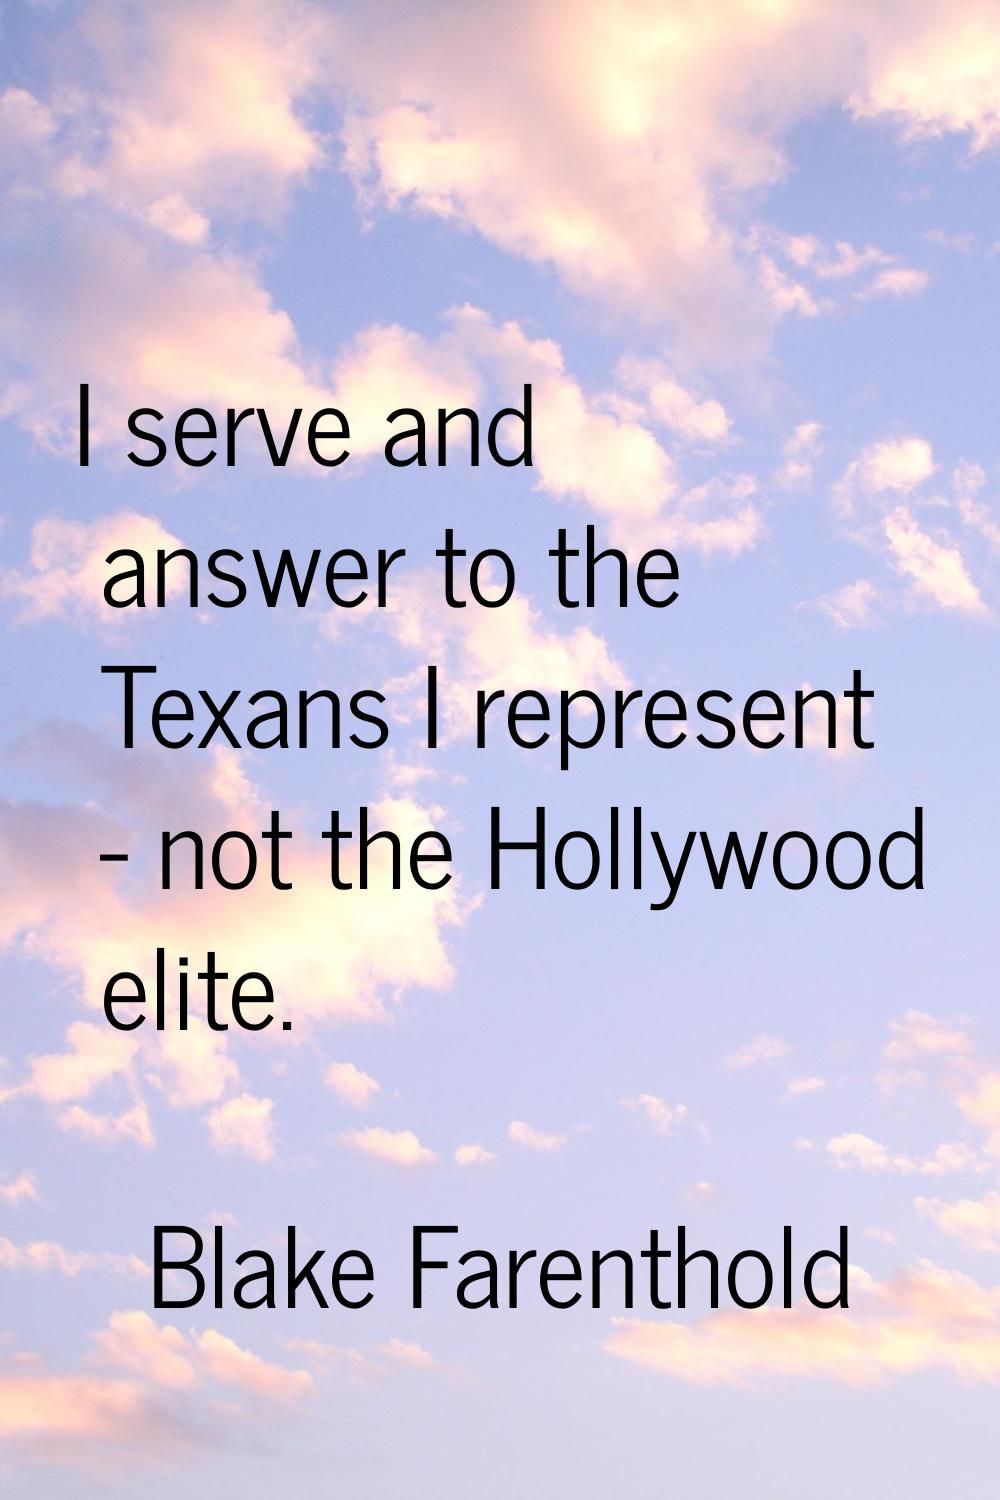 I serve and answer to the Texans I represent - not the Hollywood elite.